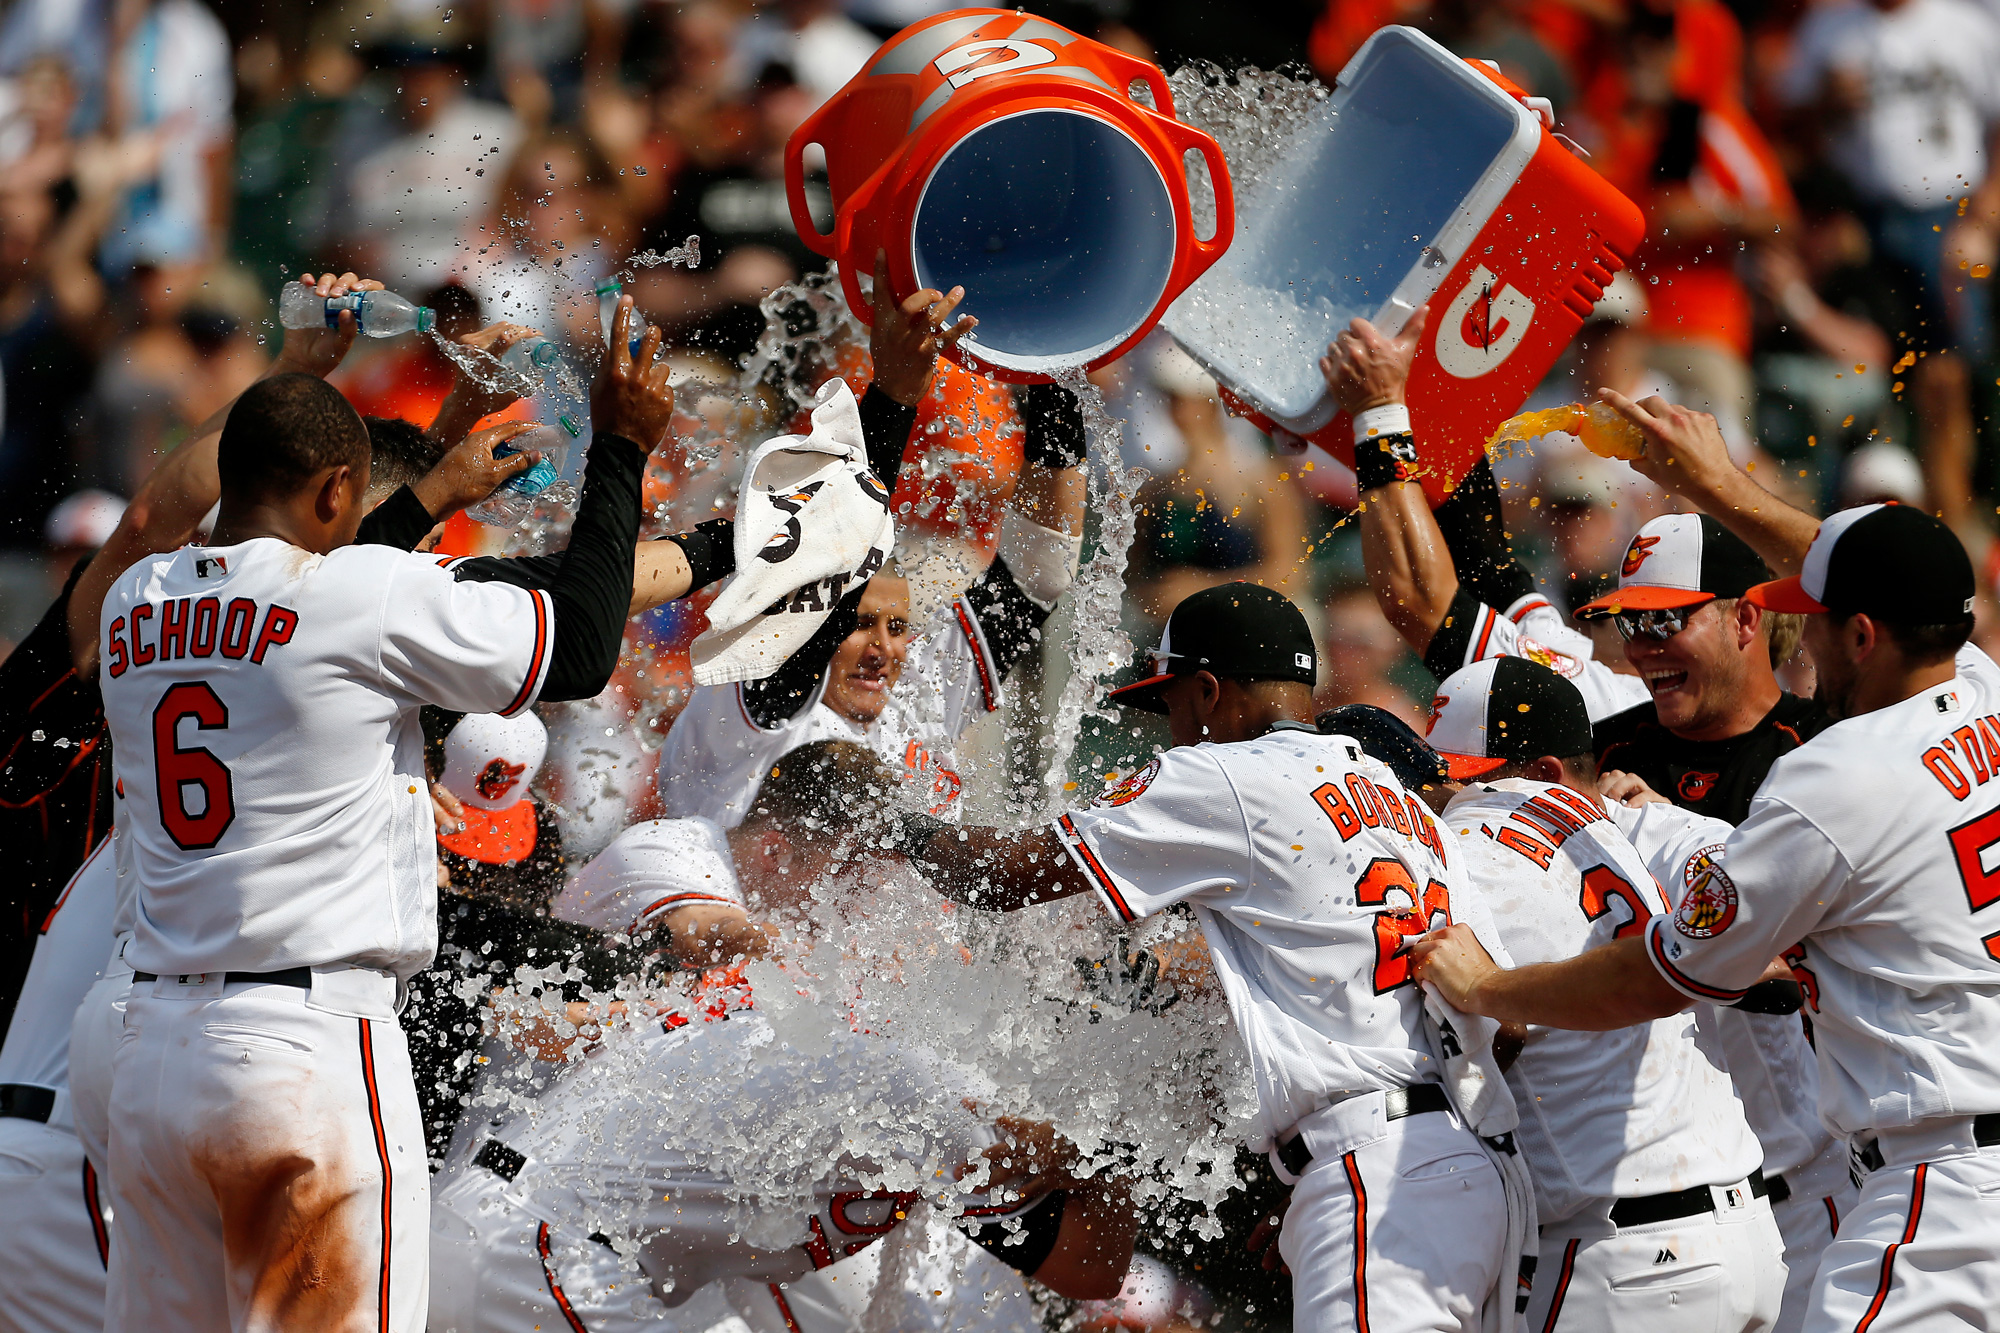  Nolan Reimold #14 of the Baltimore Orioles is swarmed by his teammates at home plate after hitting a two run walk-off home run in the ninth inning to defeat the Cleveland Indians 5-3 at Oriole Park at Camden Yards on July 24, 2016 in Baltimore, Mary